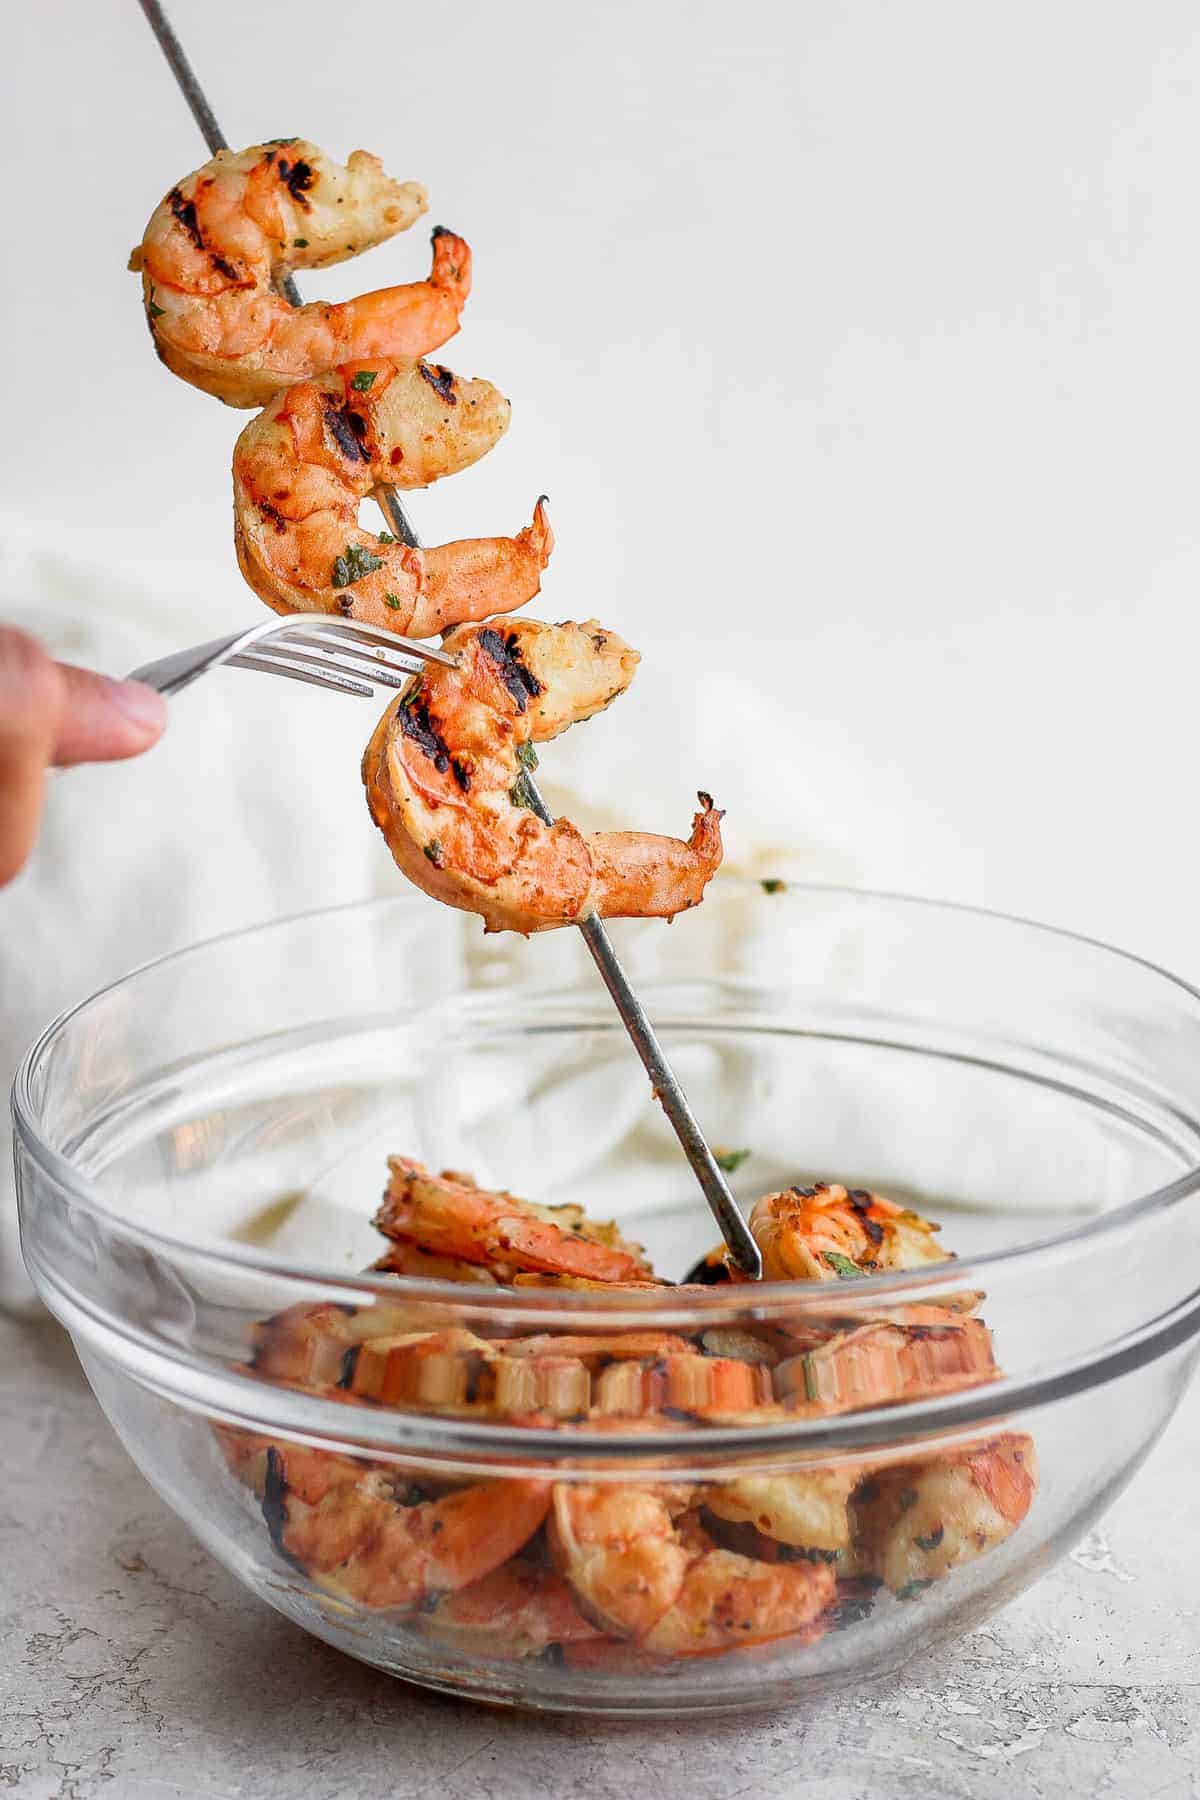 Juicy Grilled Shrimp (How to Grill Shrimp) - Fit Foodie Finds